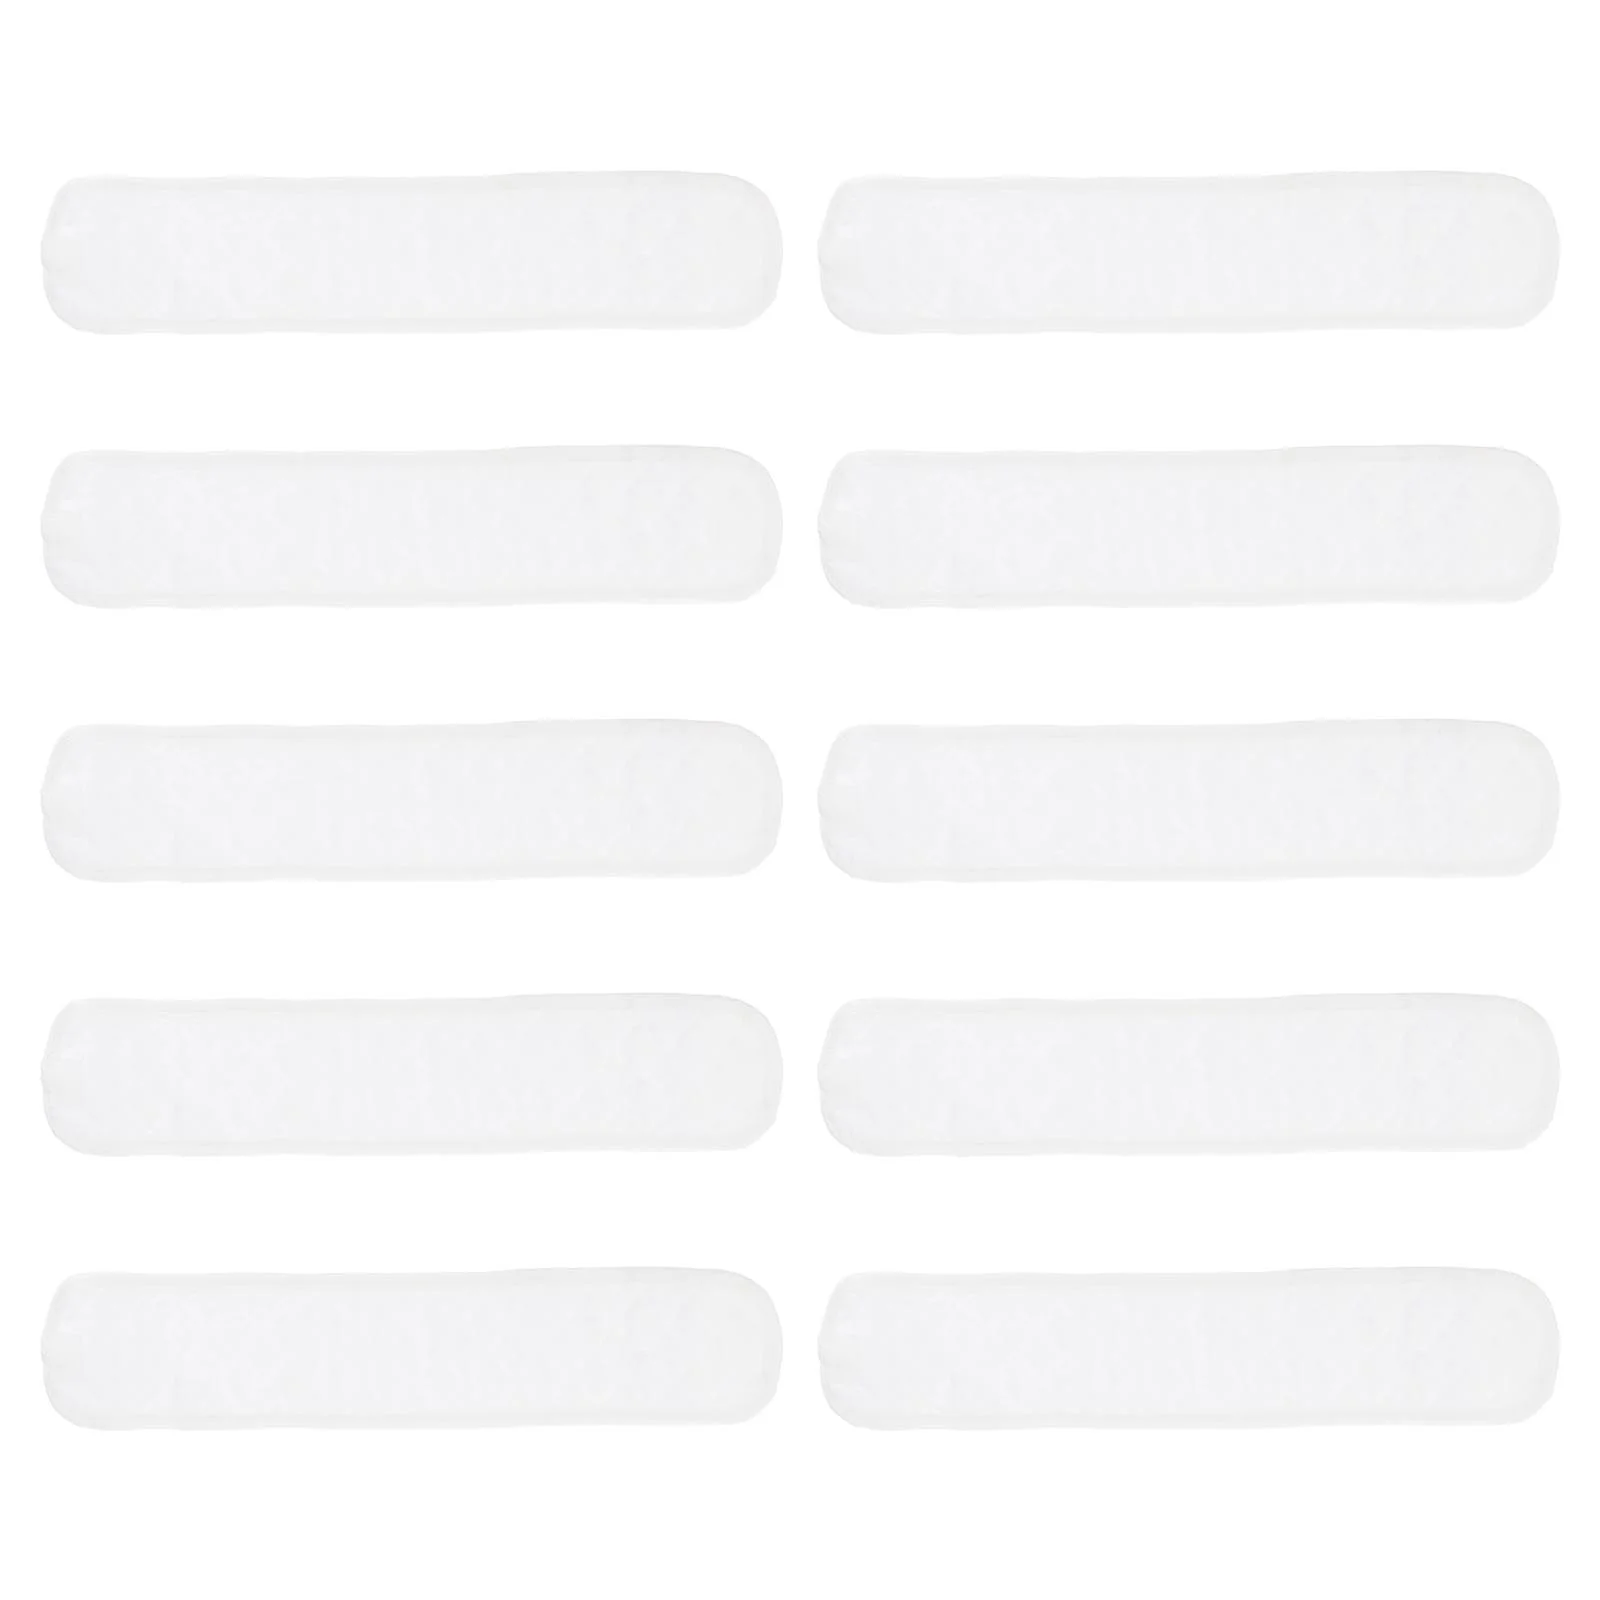 10Pcs infant navel belt Belly Band Cotton Umbilical Bands White Breathable Newborn Infant newborn belly band Bands infant belly lovely thickening cute design newborn belly protector wrap baby supplies baby bellyband infant belly wrap